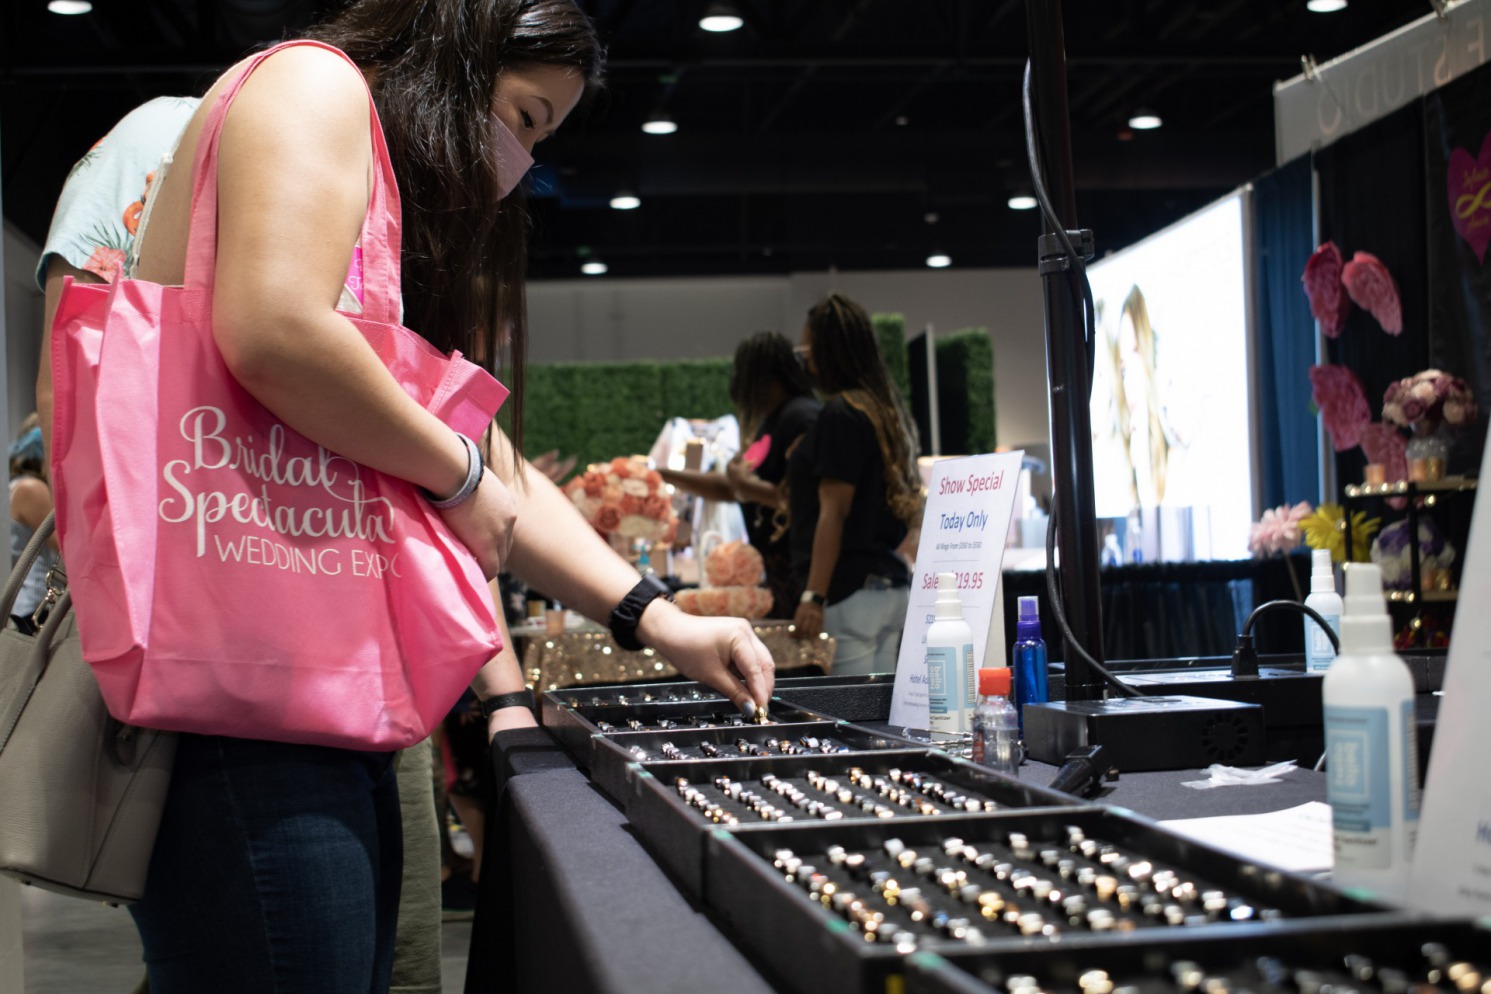 Bride to Be shops for men's wedding bands at Las Vegas Bridal Spectacular Wedding Expo for Las Vegas Wedding Professionals